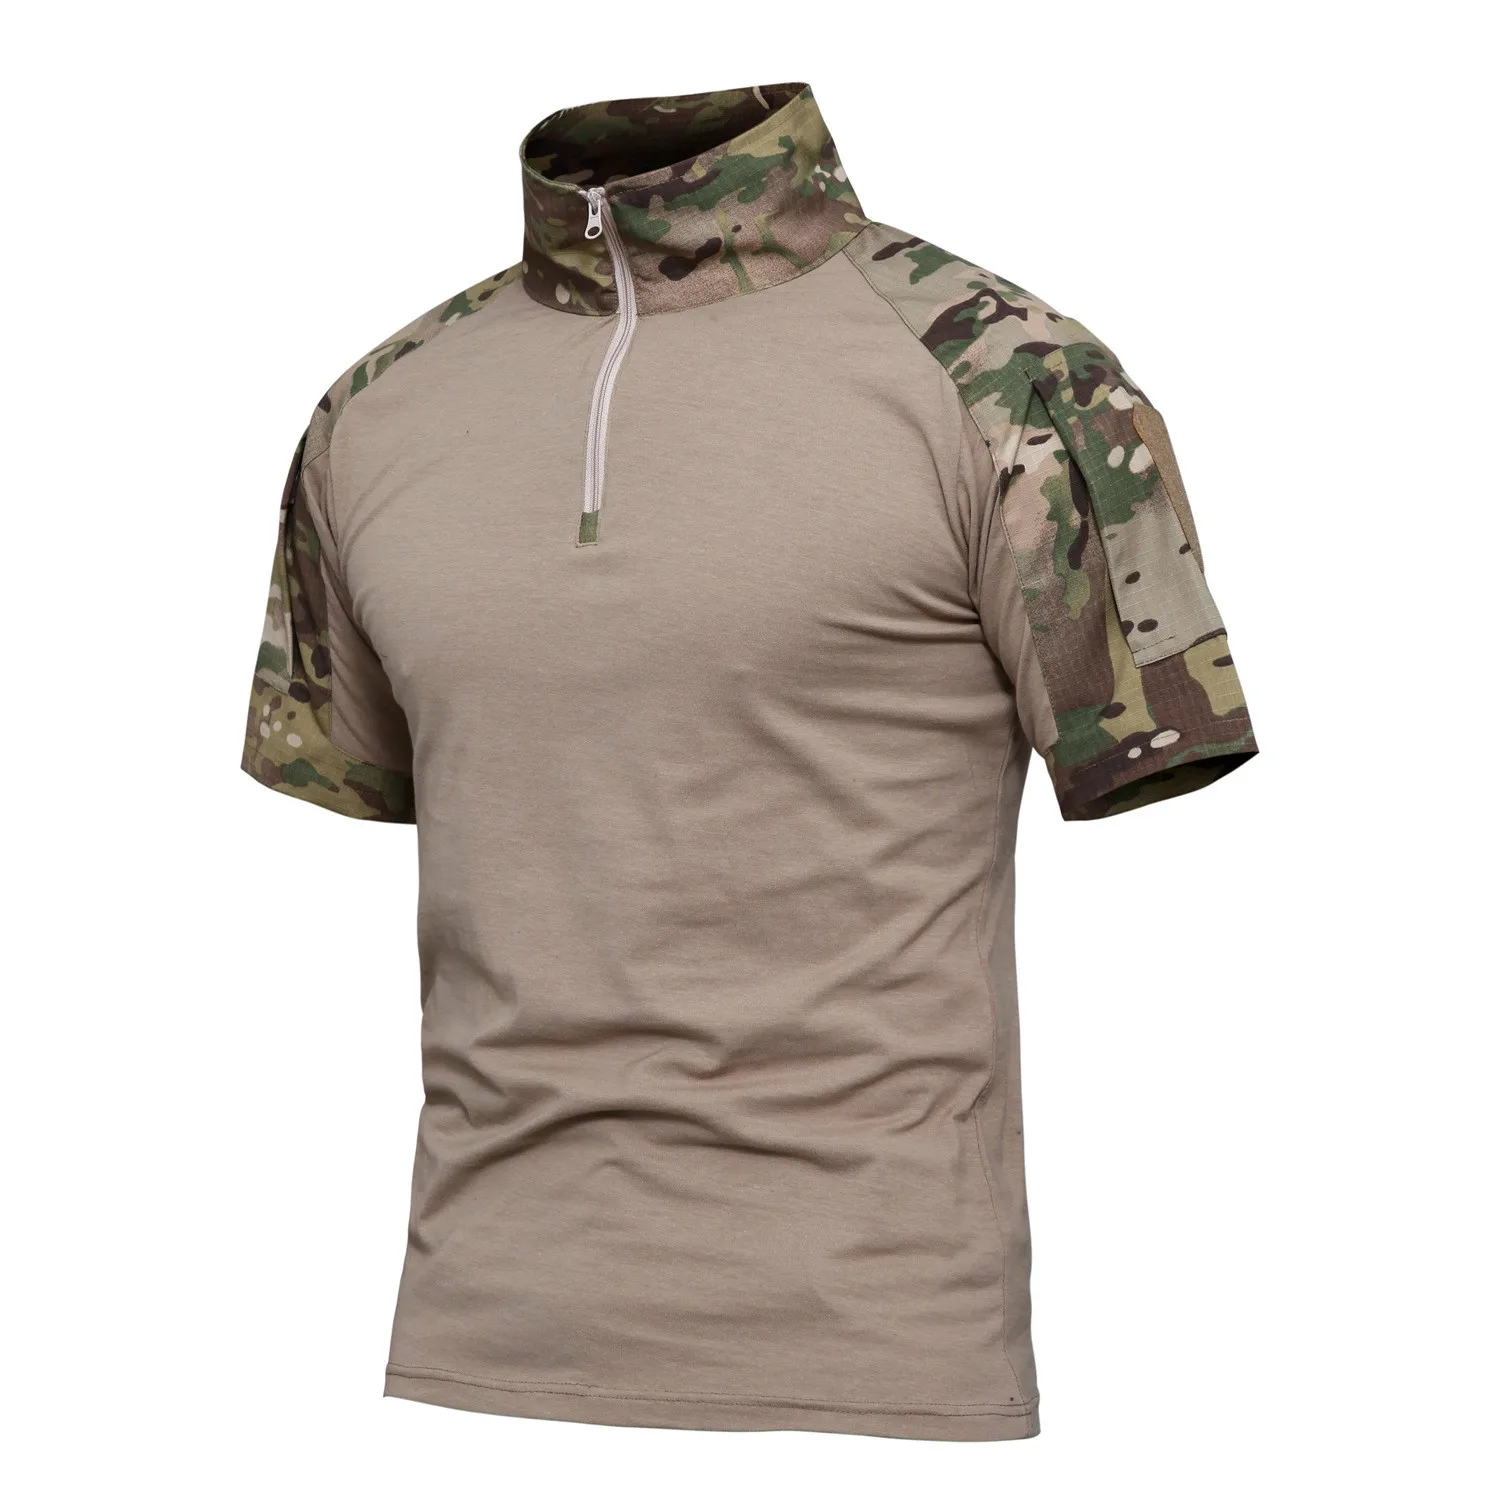 

Military Mens Camouflage Frog Suit Short Sleeve Brand Cotton Fat Slim Casual Tactical T Shirt Men Training Shirts S-4XL